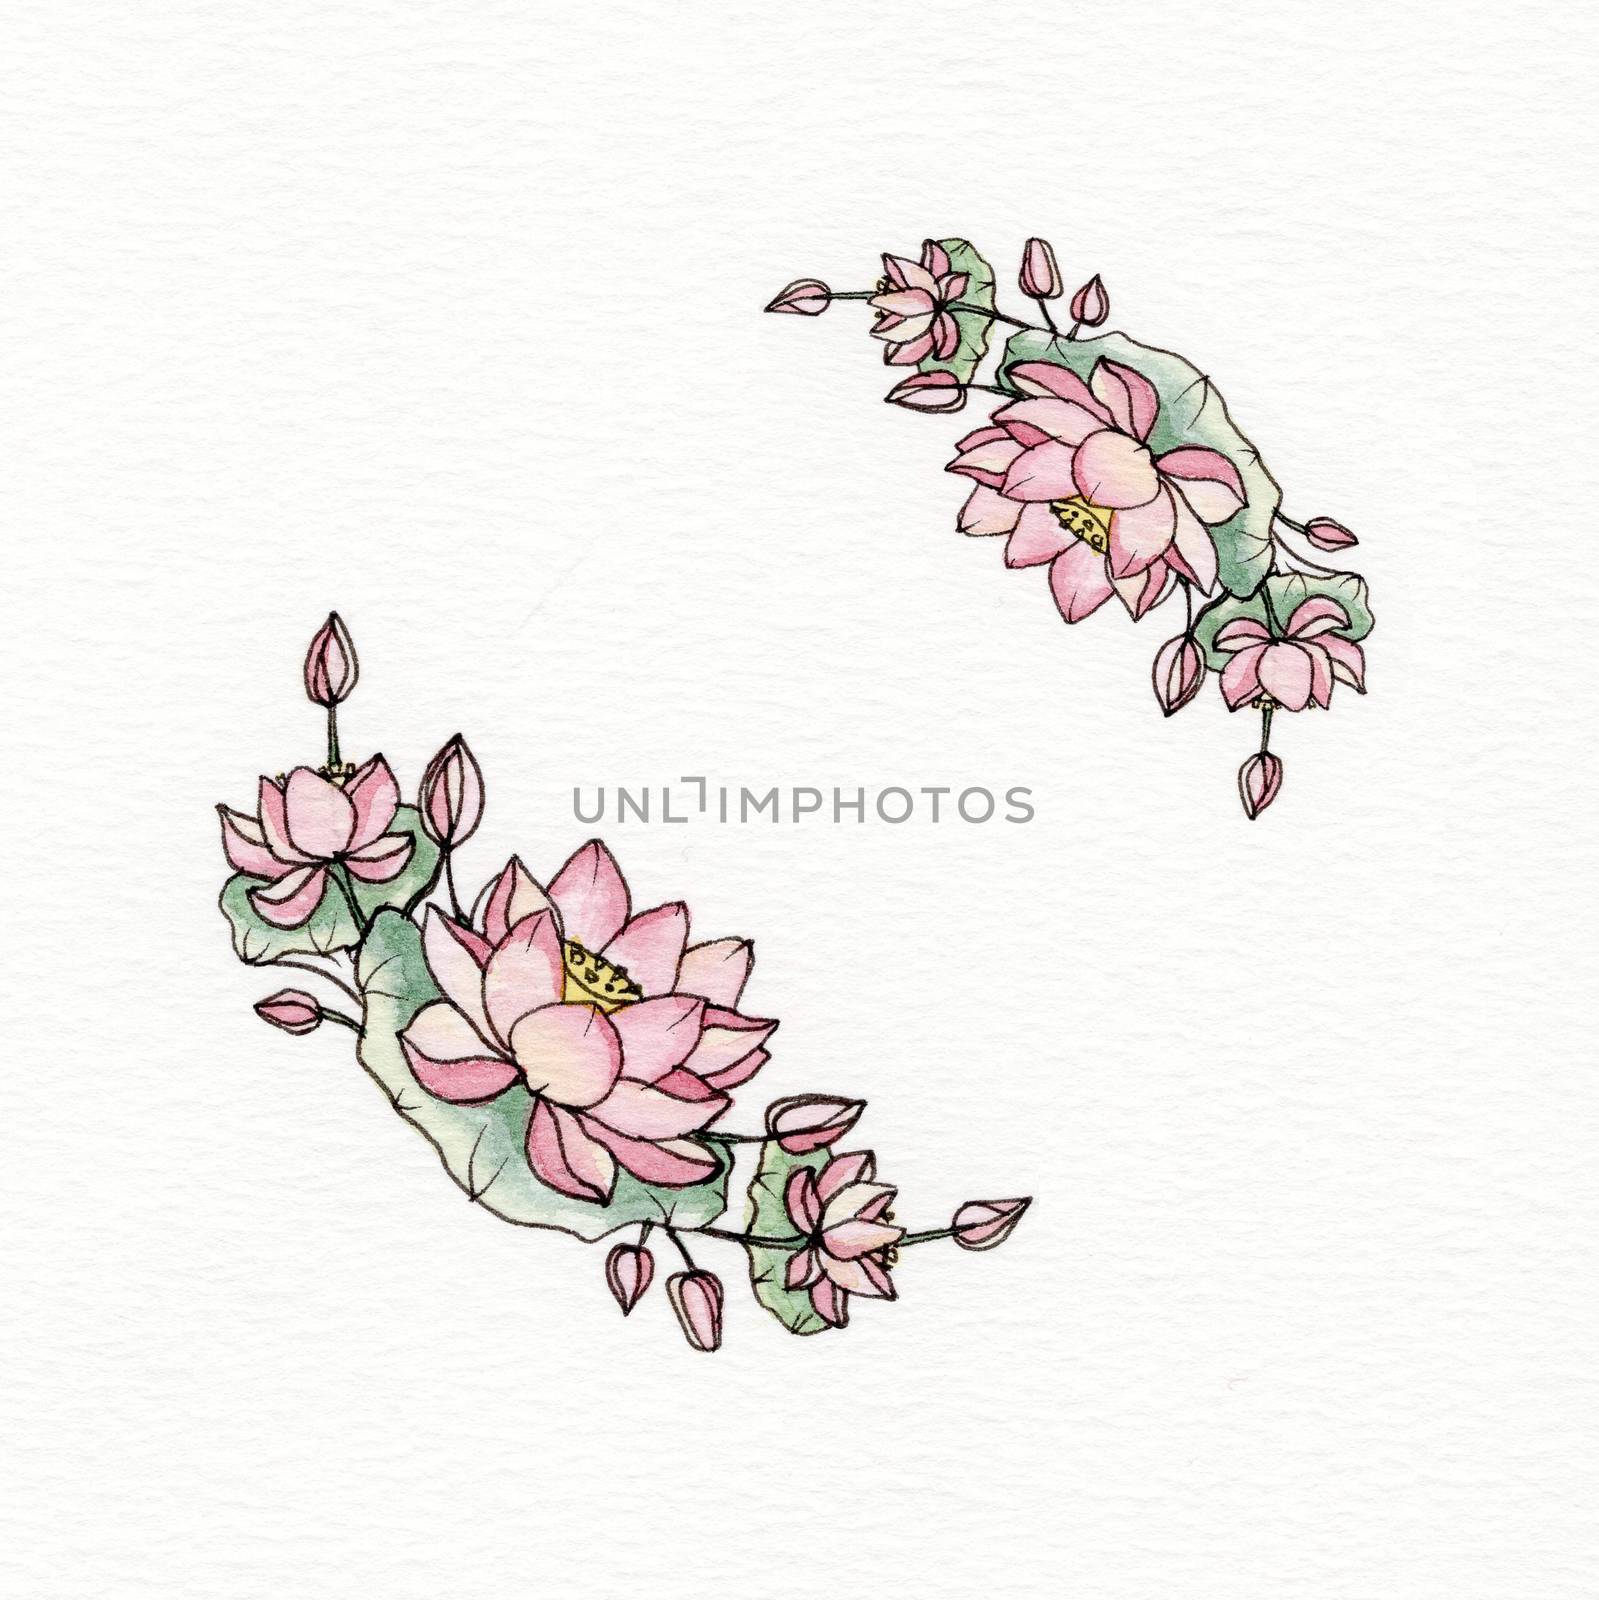 Graphic wreath with flowers of lotus. Used for wedding invitation, greeting cards